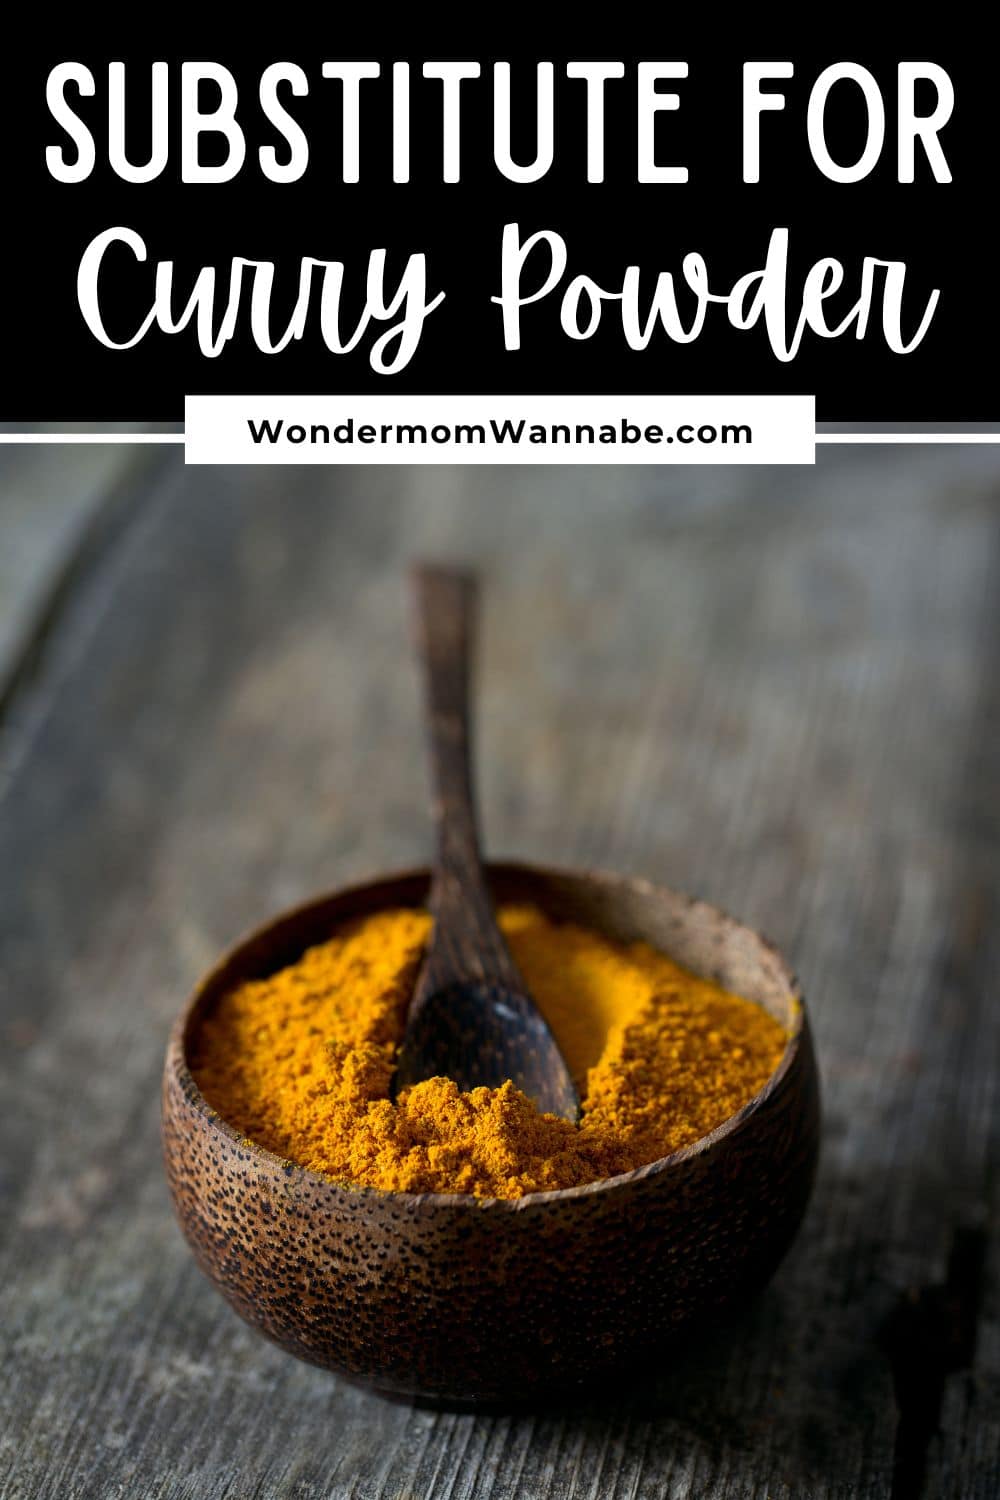 A bowl of curry powder with the text substitute for curry powder.